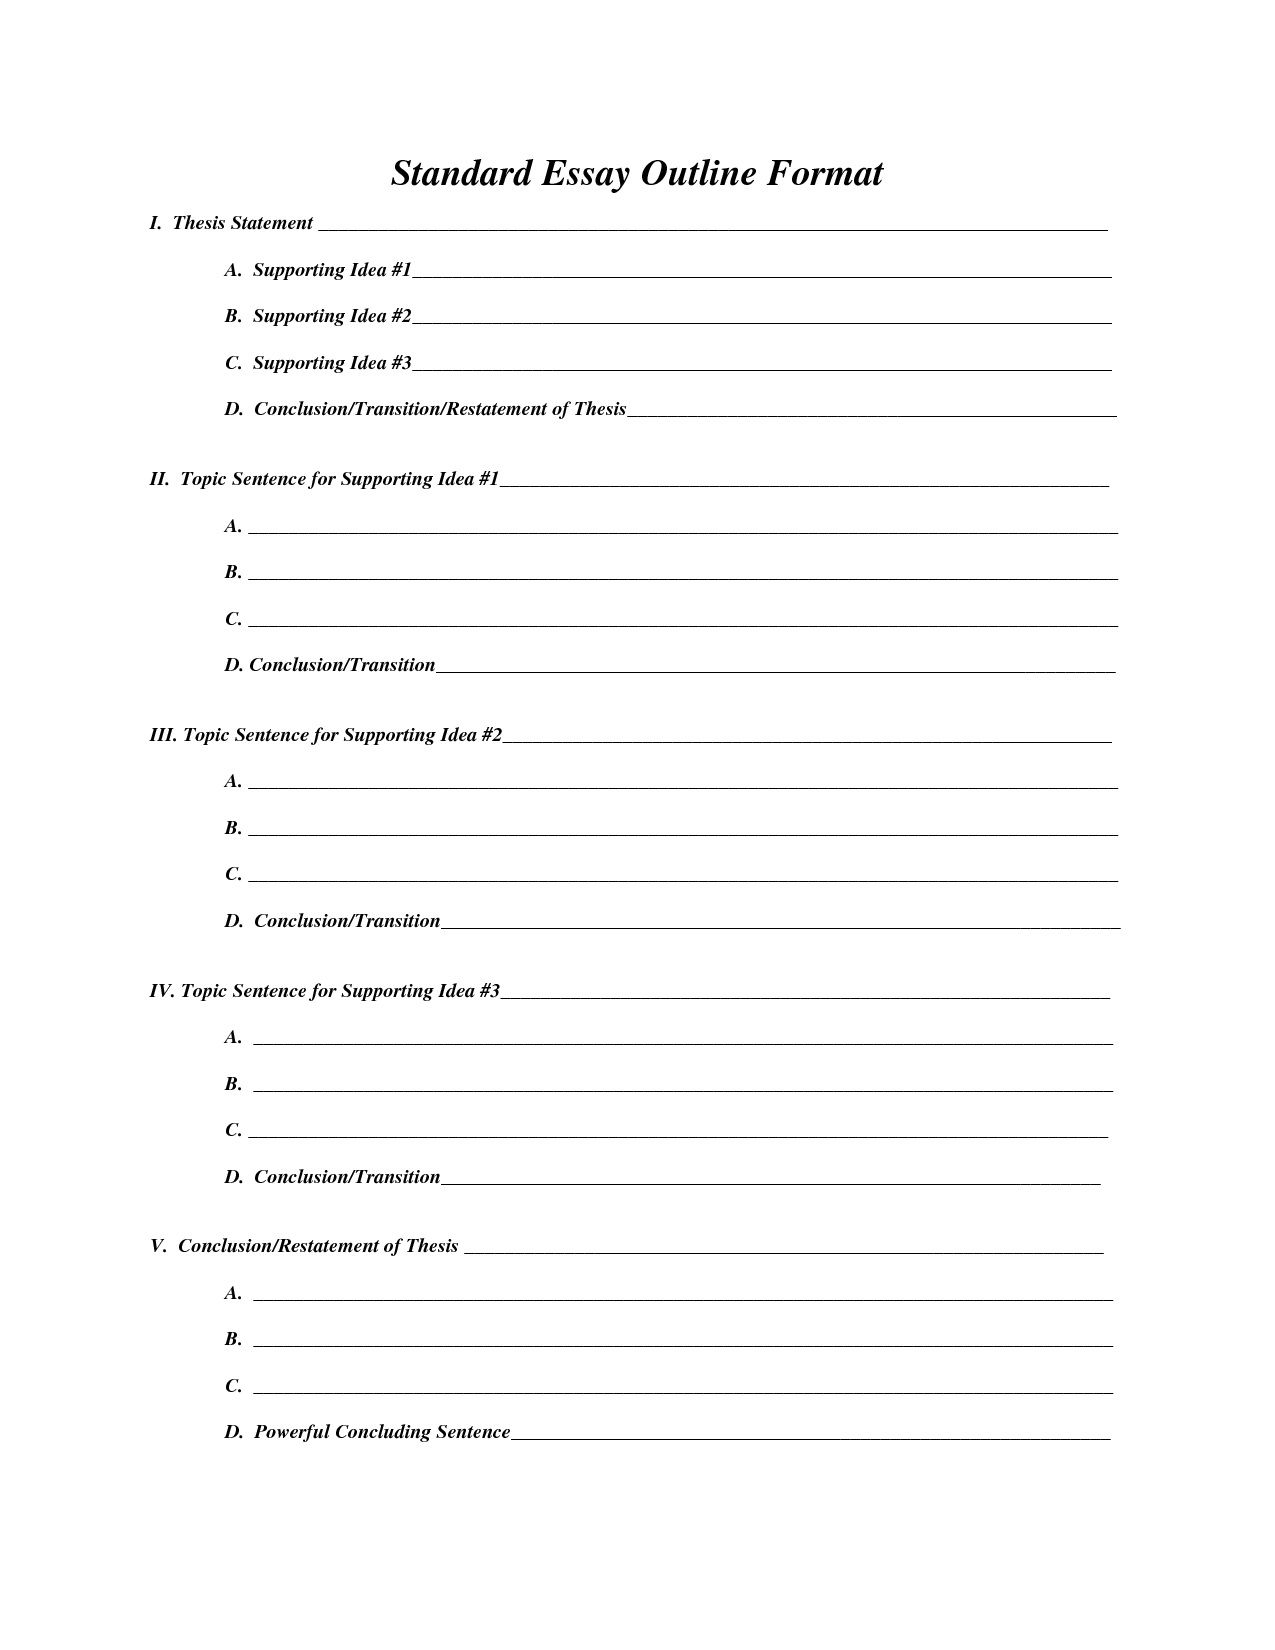 Compare and Contrast the Essay Outline Template | room ...